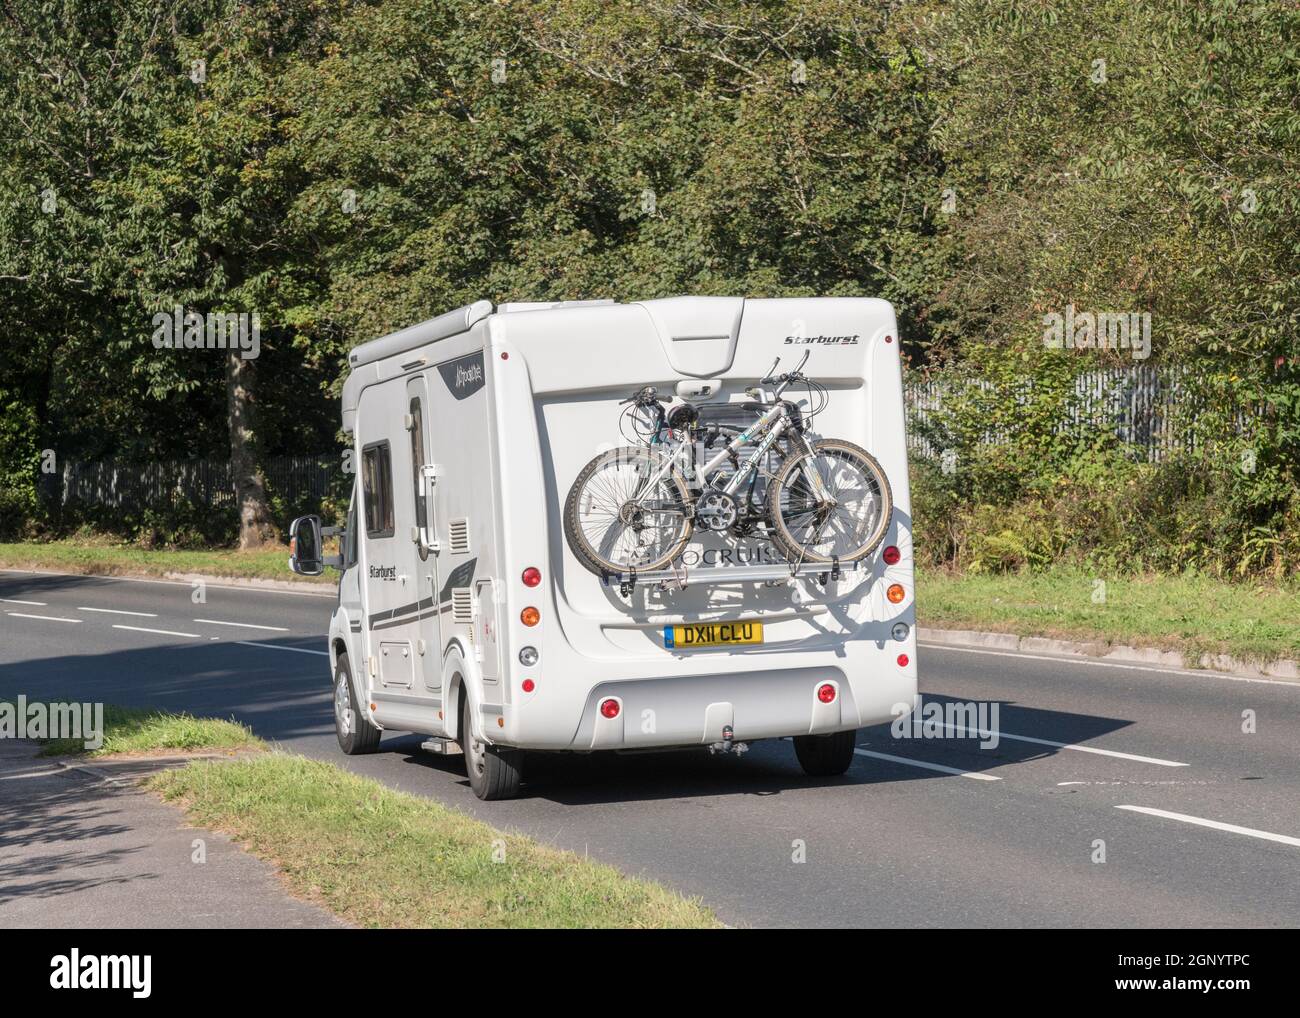 Autocruise Starburst motorhome & mountain bikes travelling downhill on Cornwall country road. For UK motorhomes, UK staycations, alternative holidays. Stock Photo